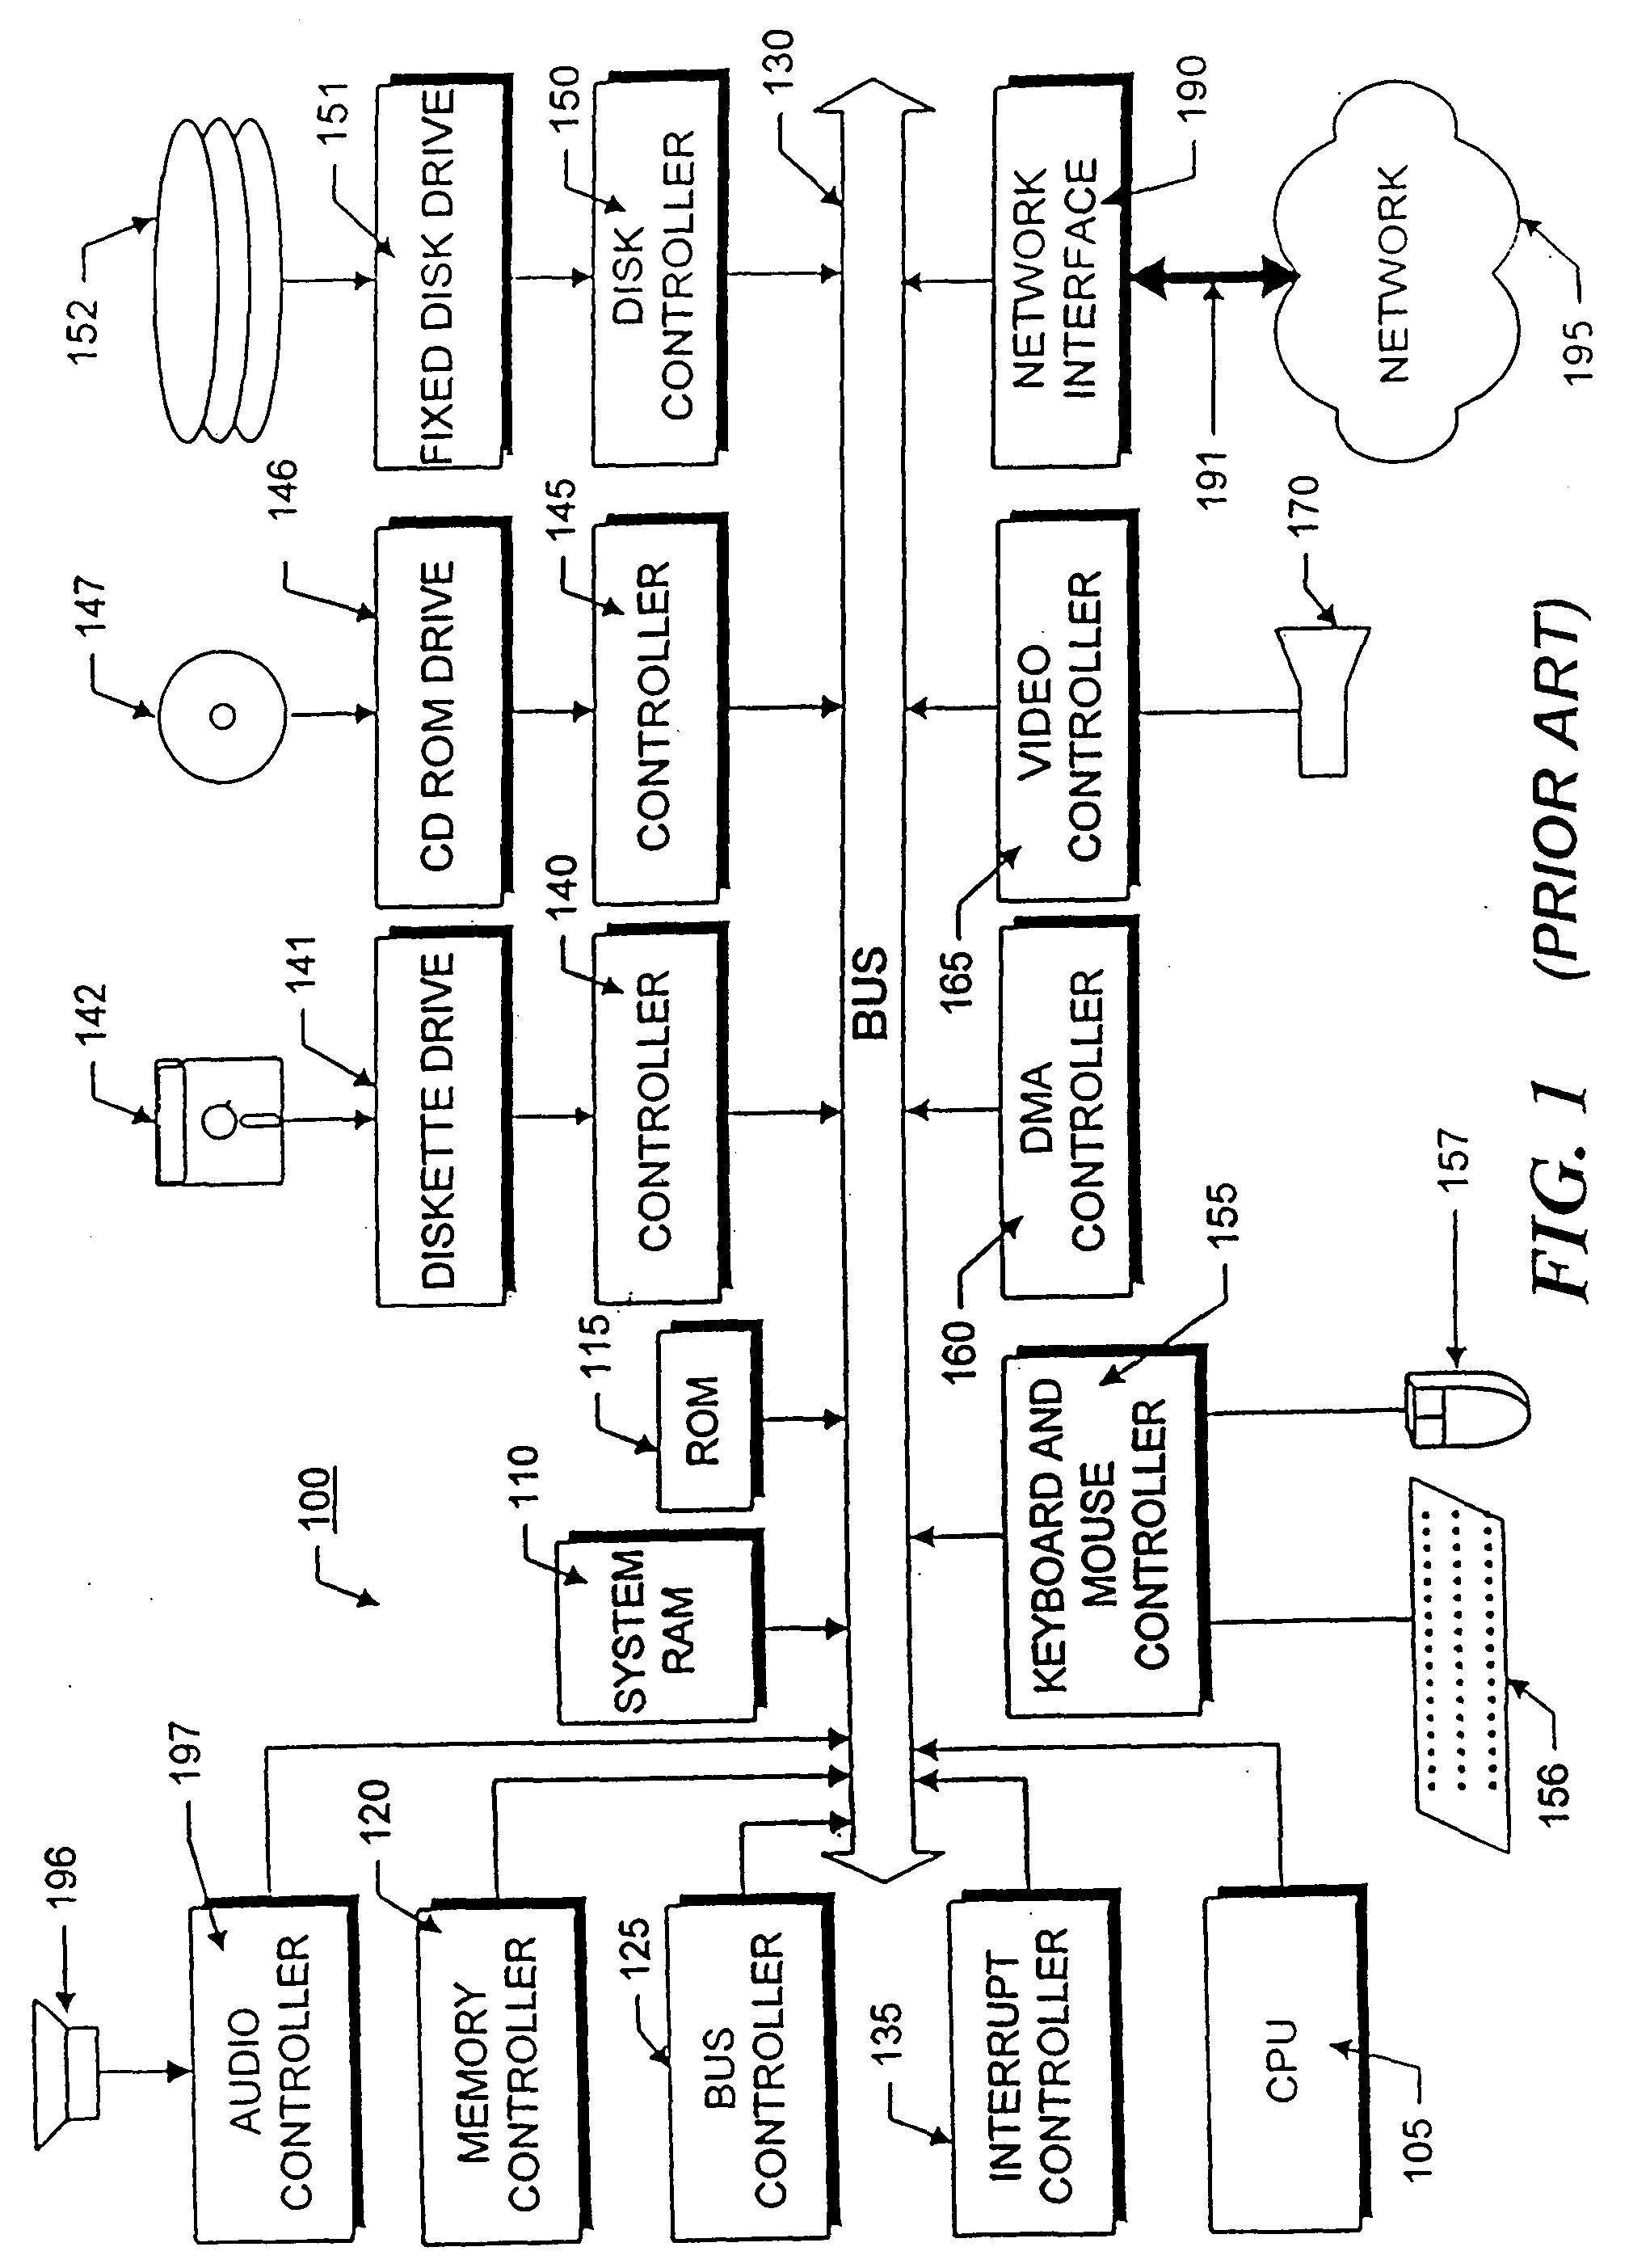 Method and apparatus for generating data change requests containing data consistency information in a peer-to-peer collaborative computer system